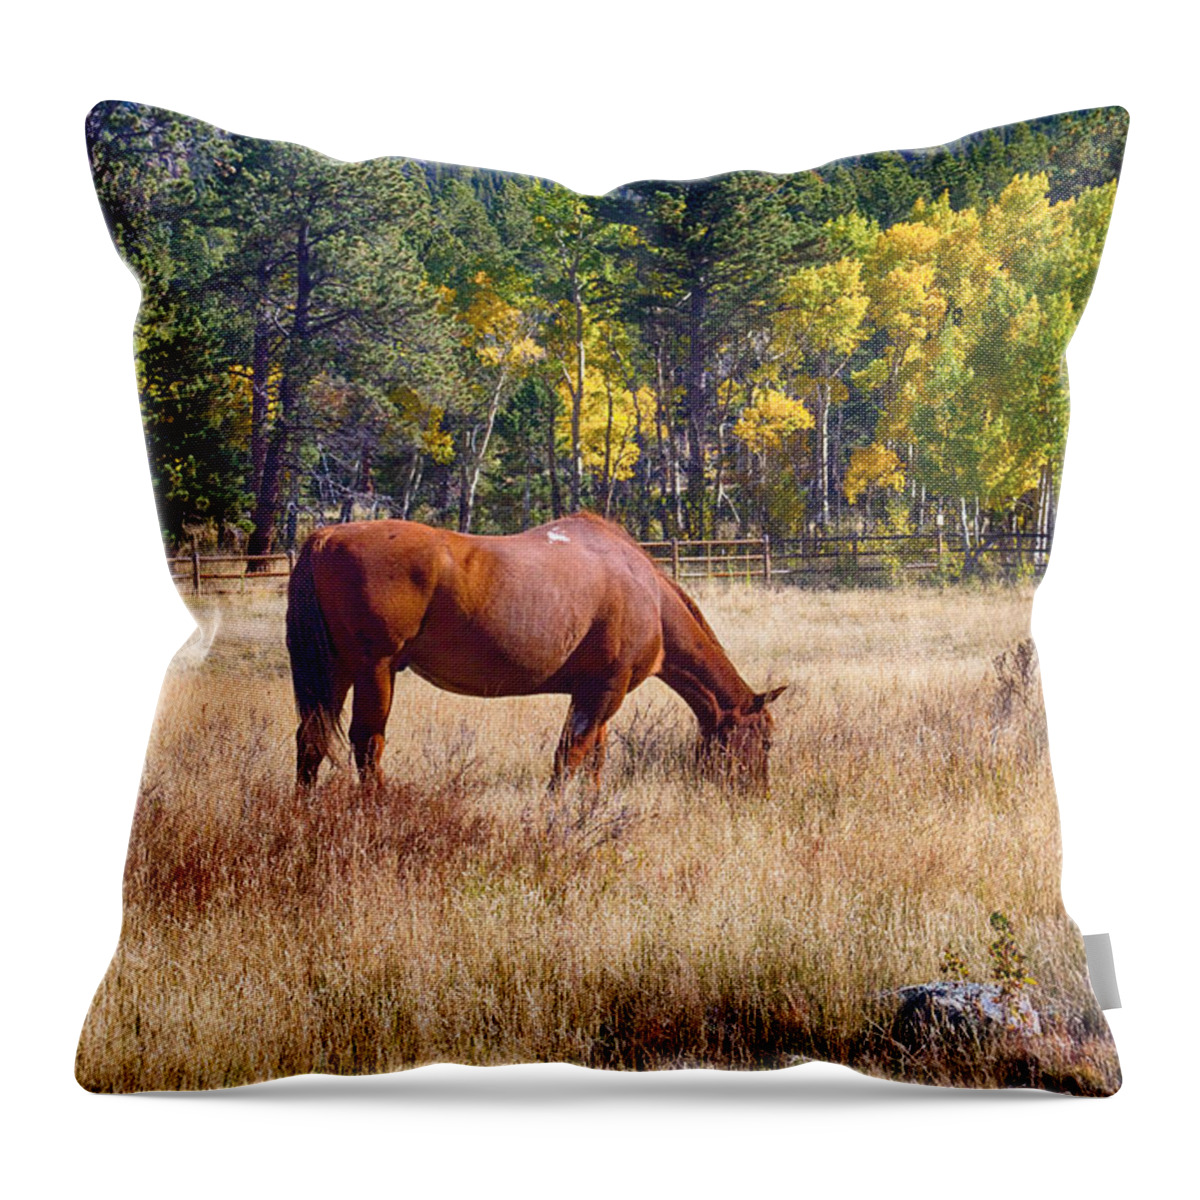 Autumn Throw Pillow featuring the photograph Autumn High Country Horse Grazing by James BO Insogna